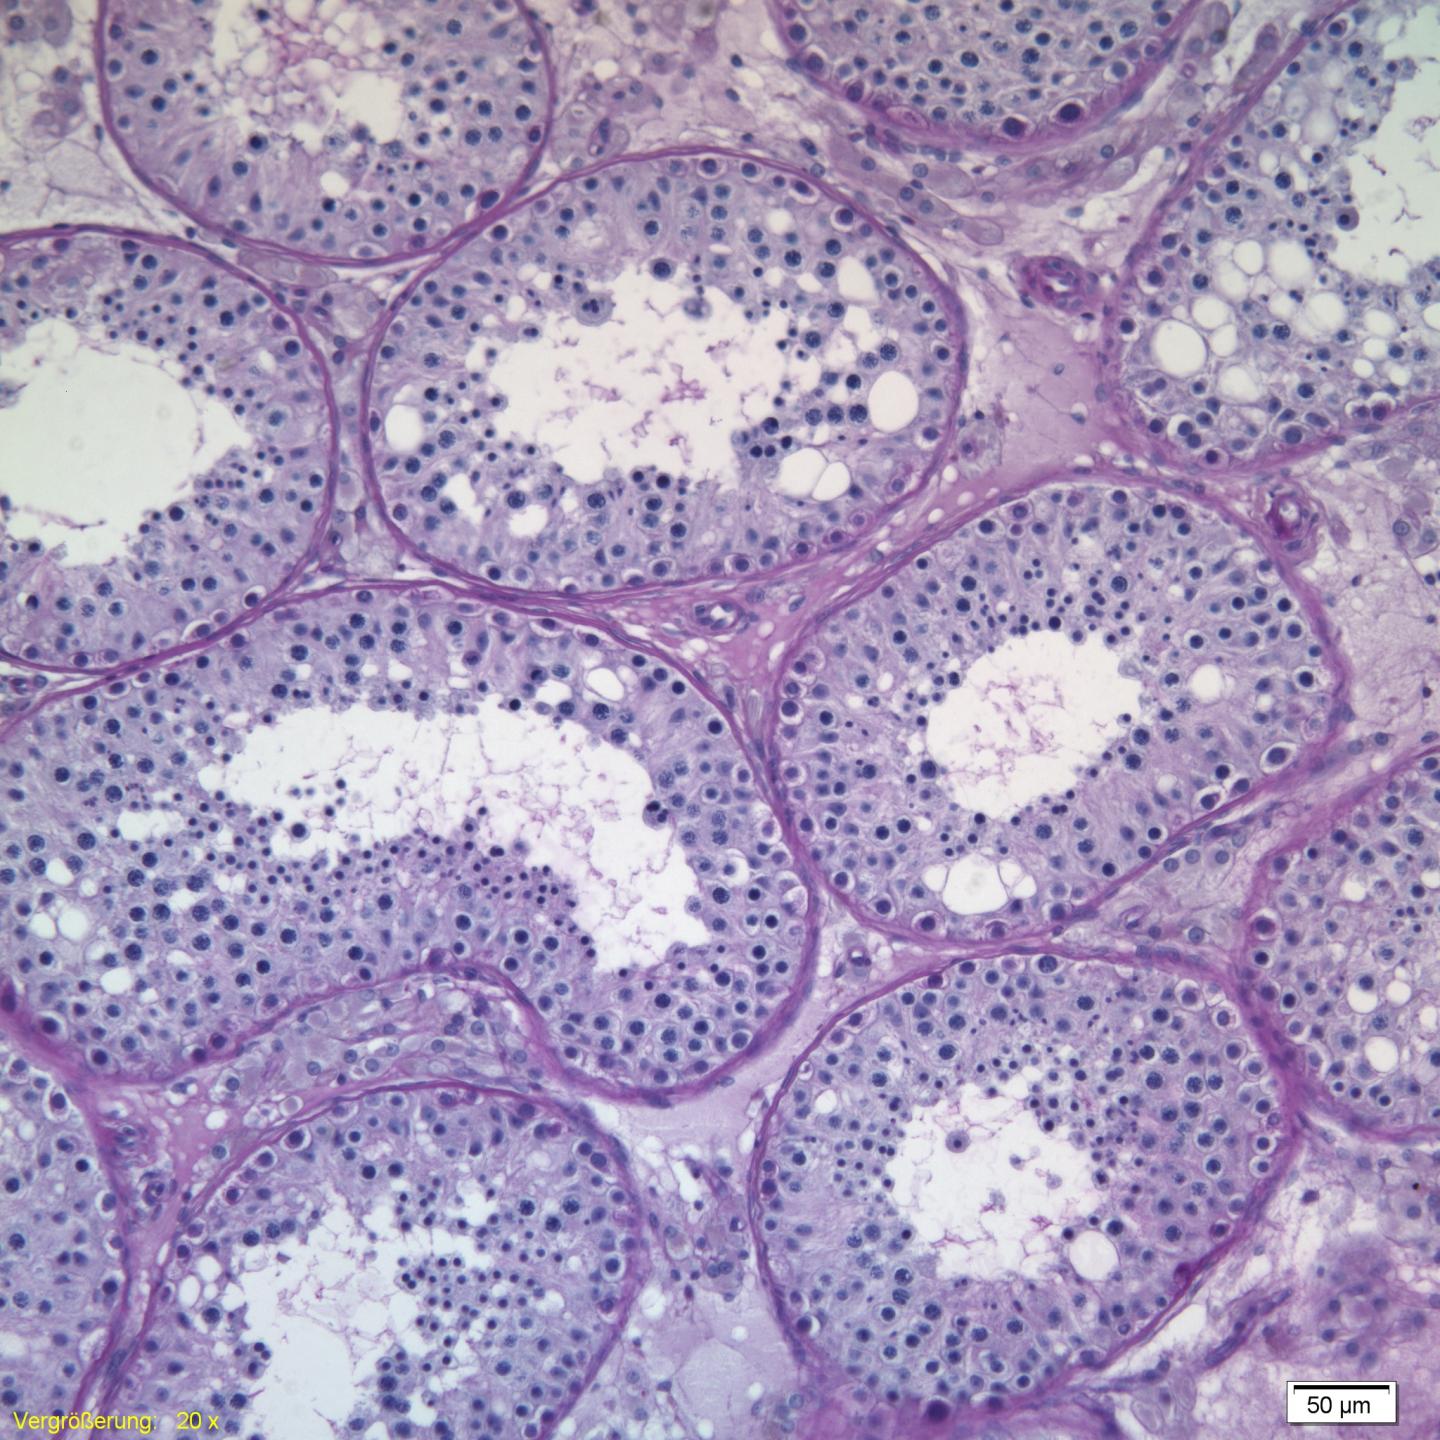 Section of a Normal Testes of a Young Man